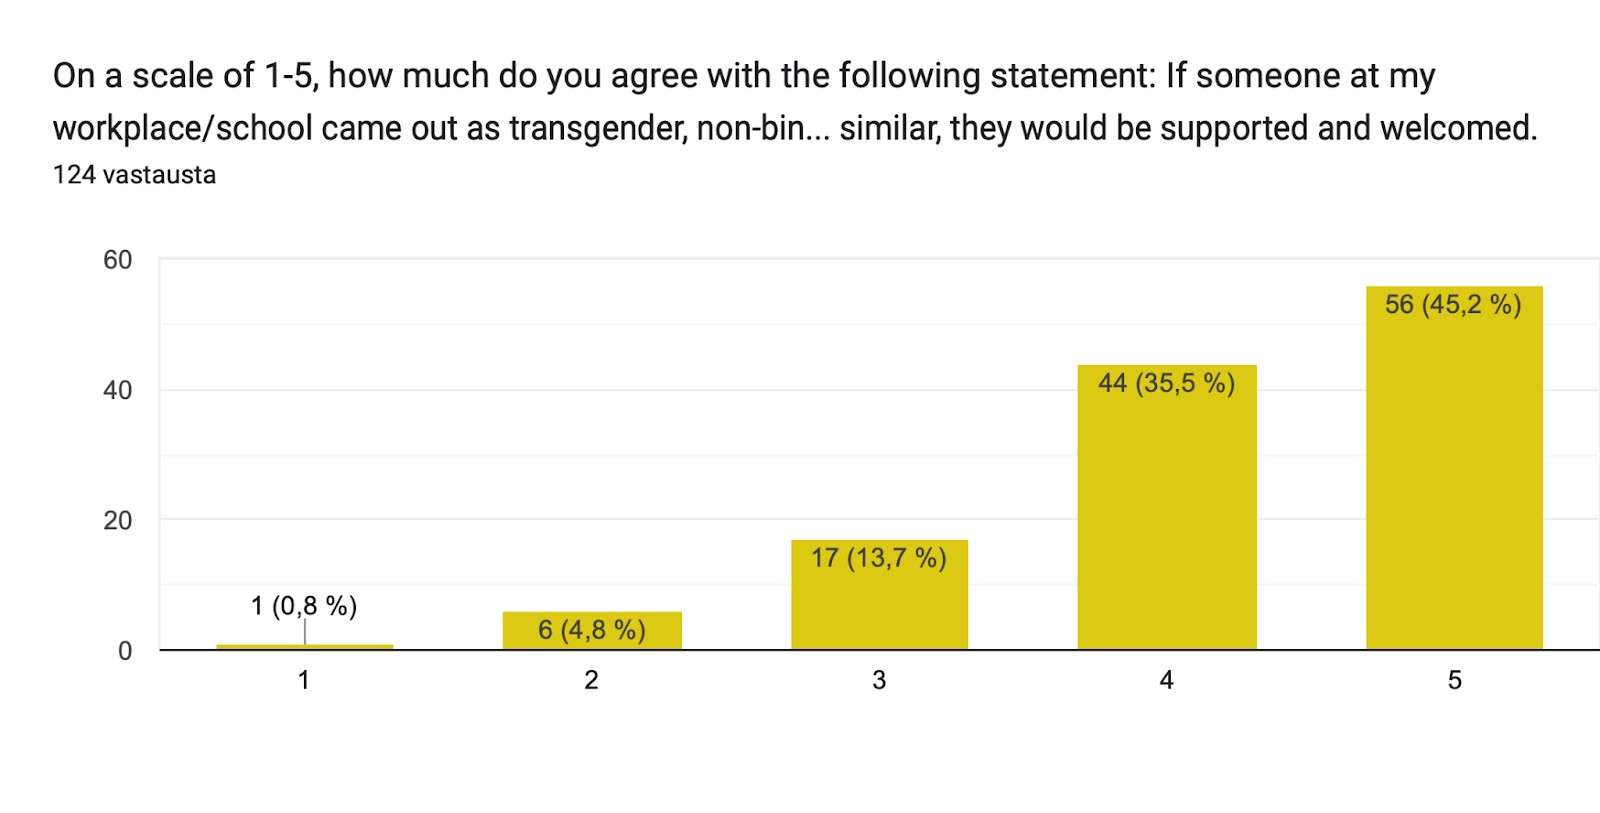 Formsin vastausdiagrammi. Kysymyksen otsikko: On a scale of 1-5, how much do you agree with the following statement: If someone at my workplace/school came out as transgender, non-binary, or similar, they would be supported and welcomed.
. Vastausten määrä: 124 vastausta.